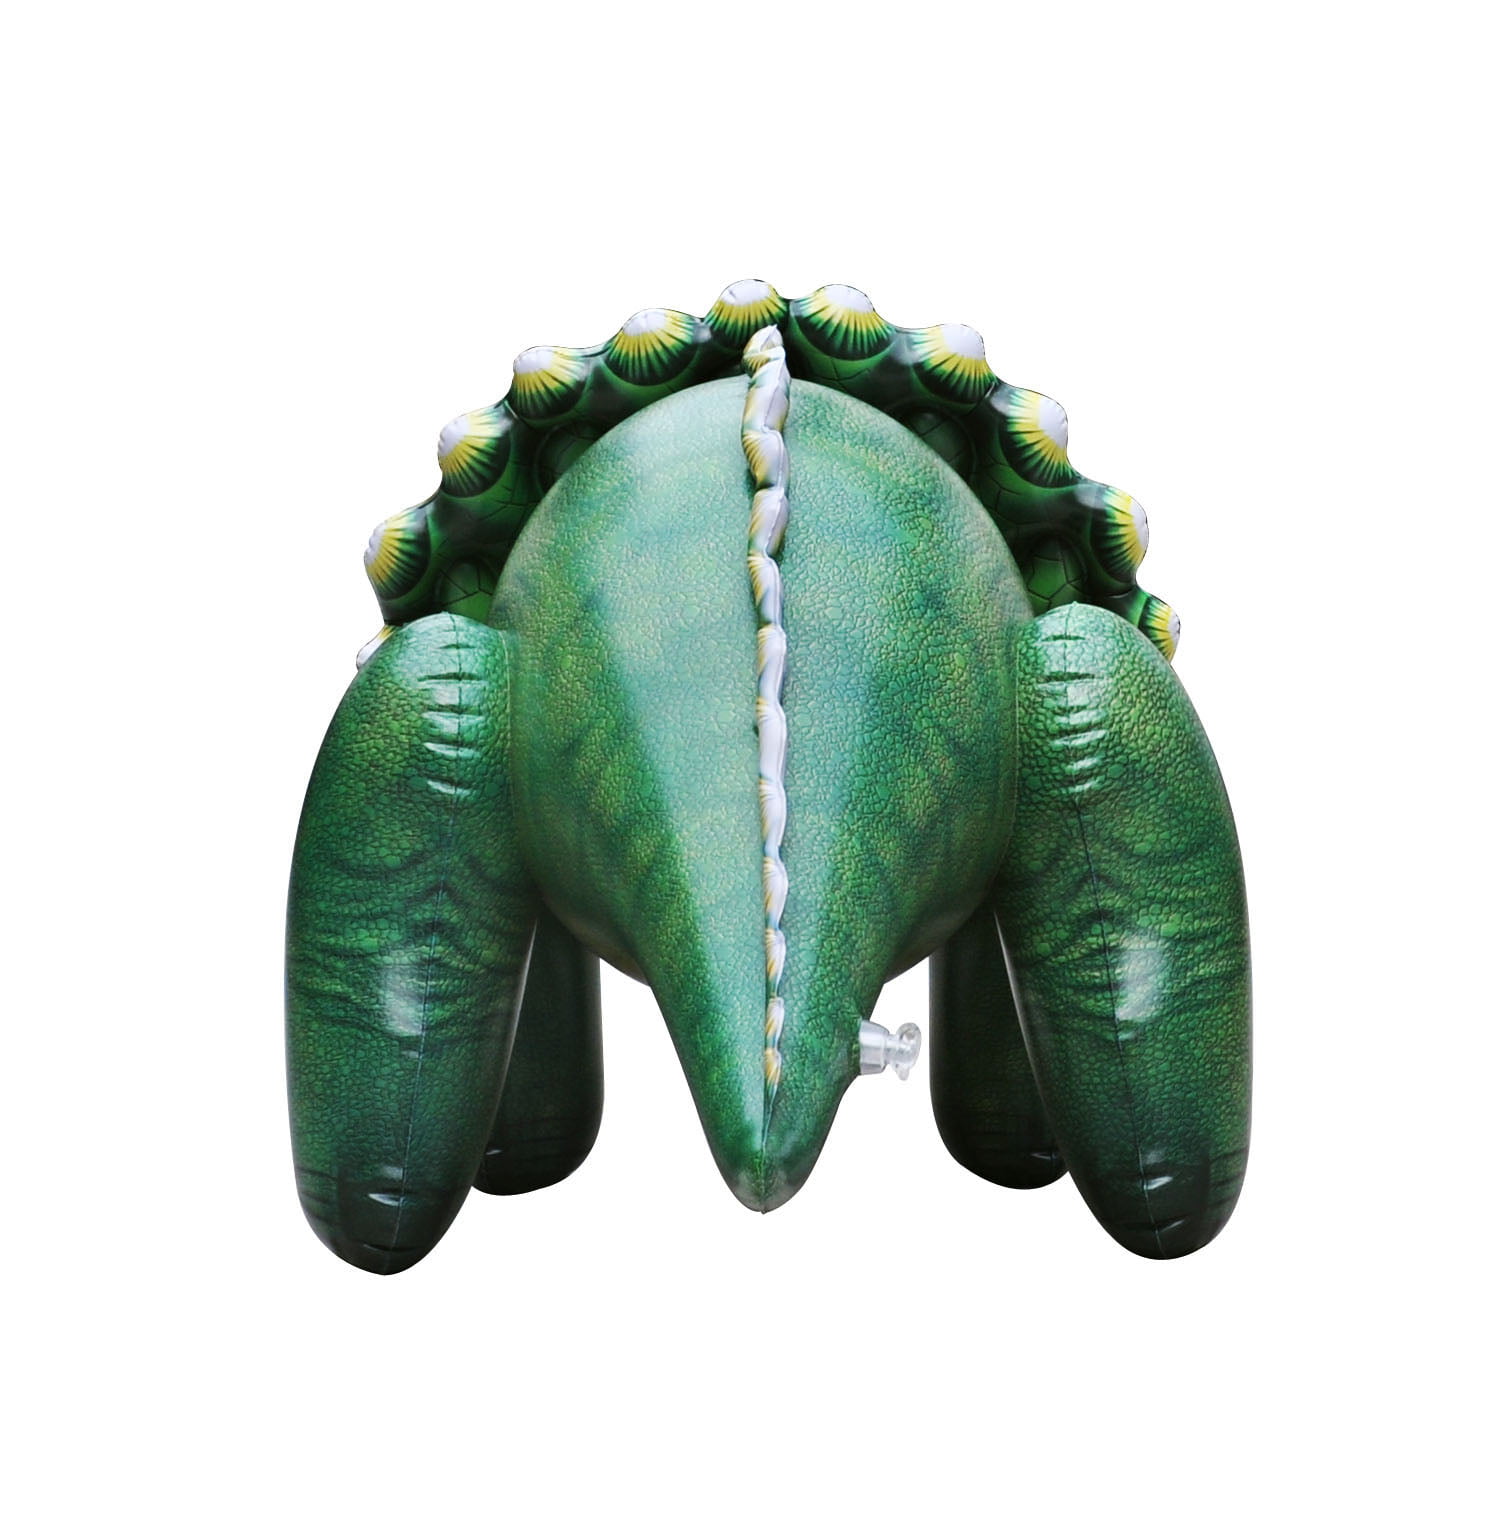 Triceratops Inflatable Jurassic Dinosaur Party Decorations 43 Inches Long for sale online